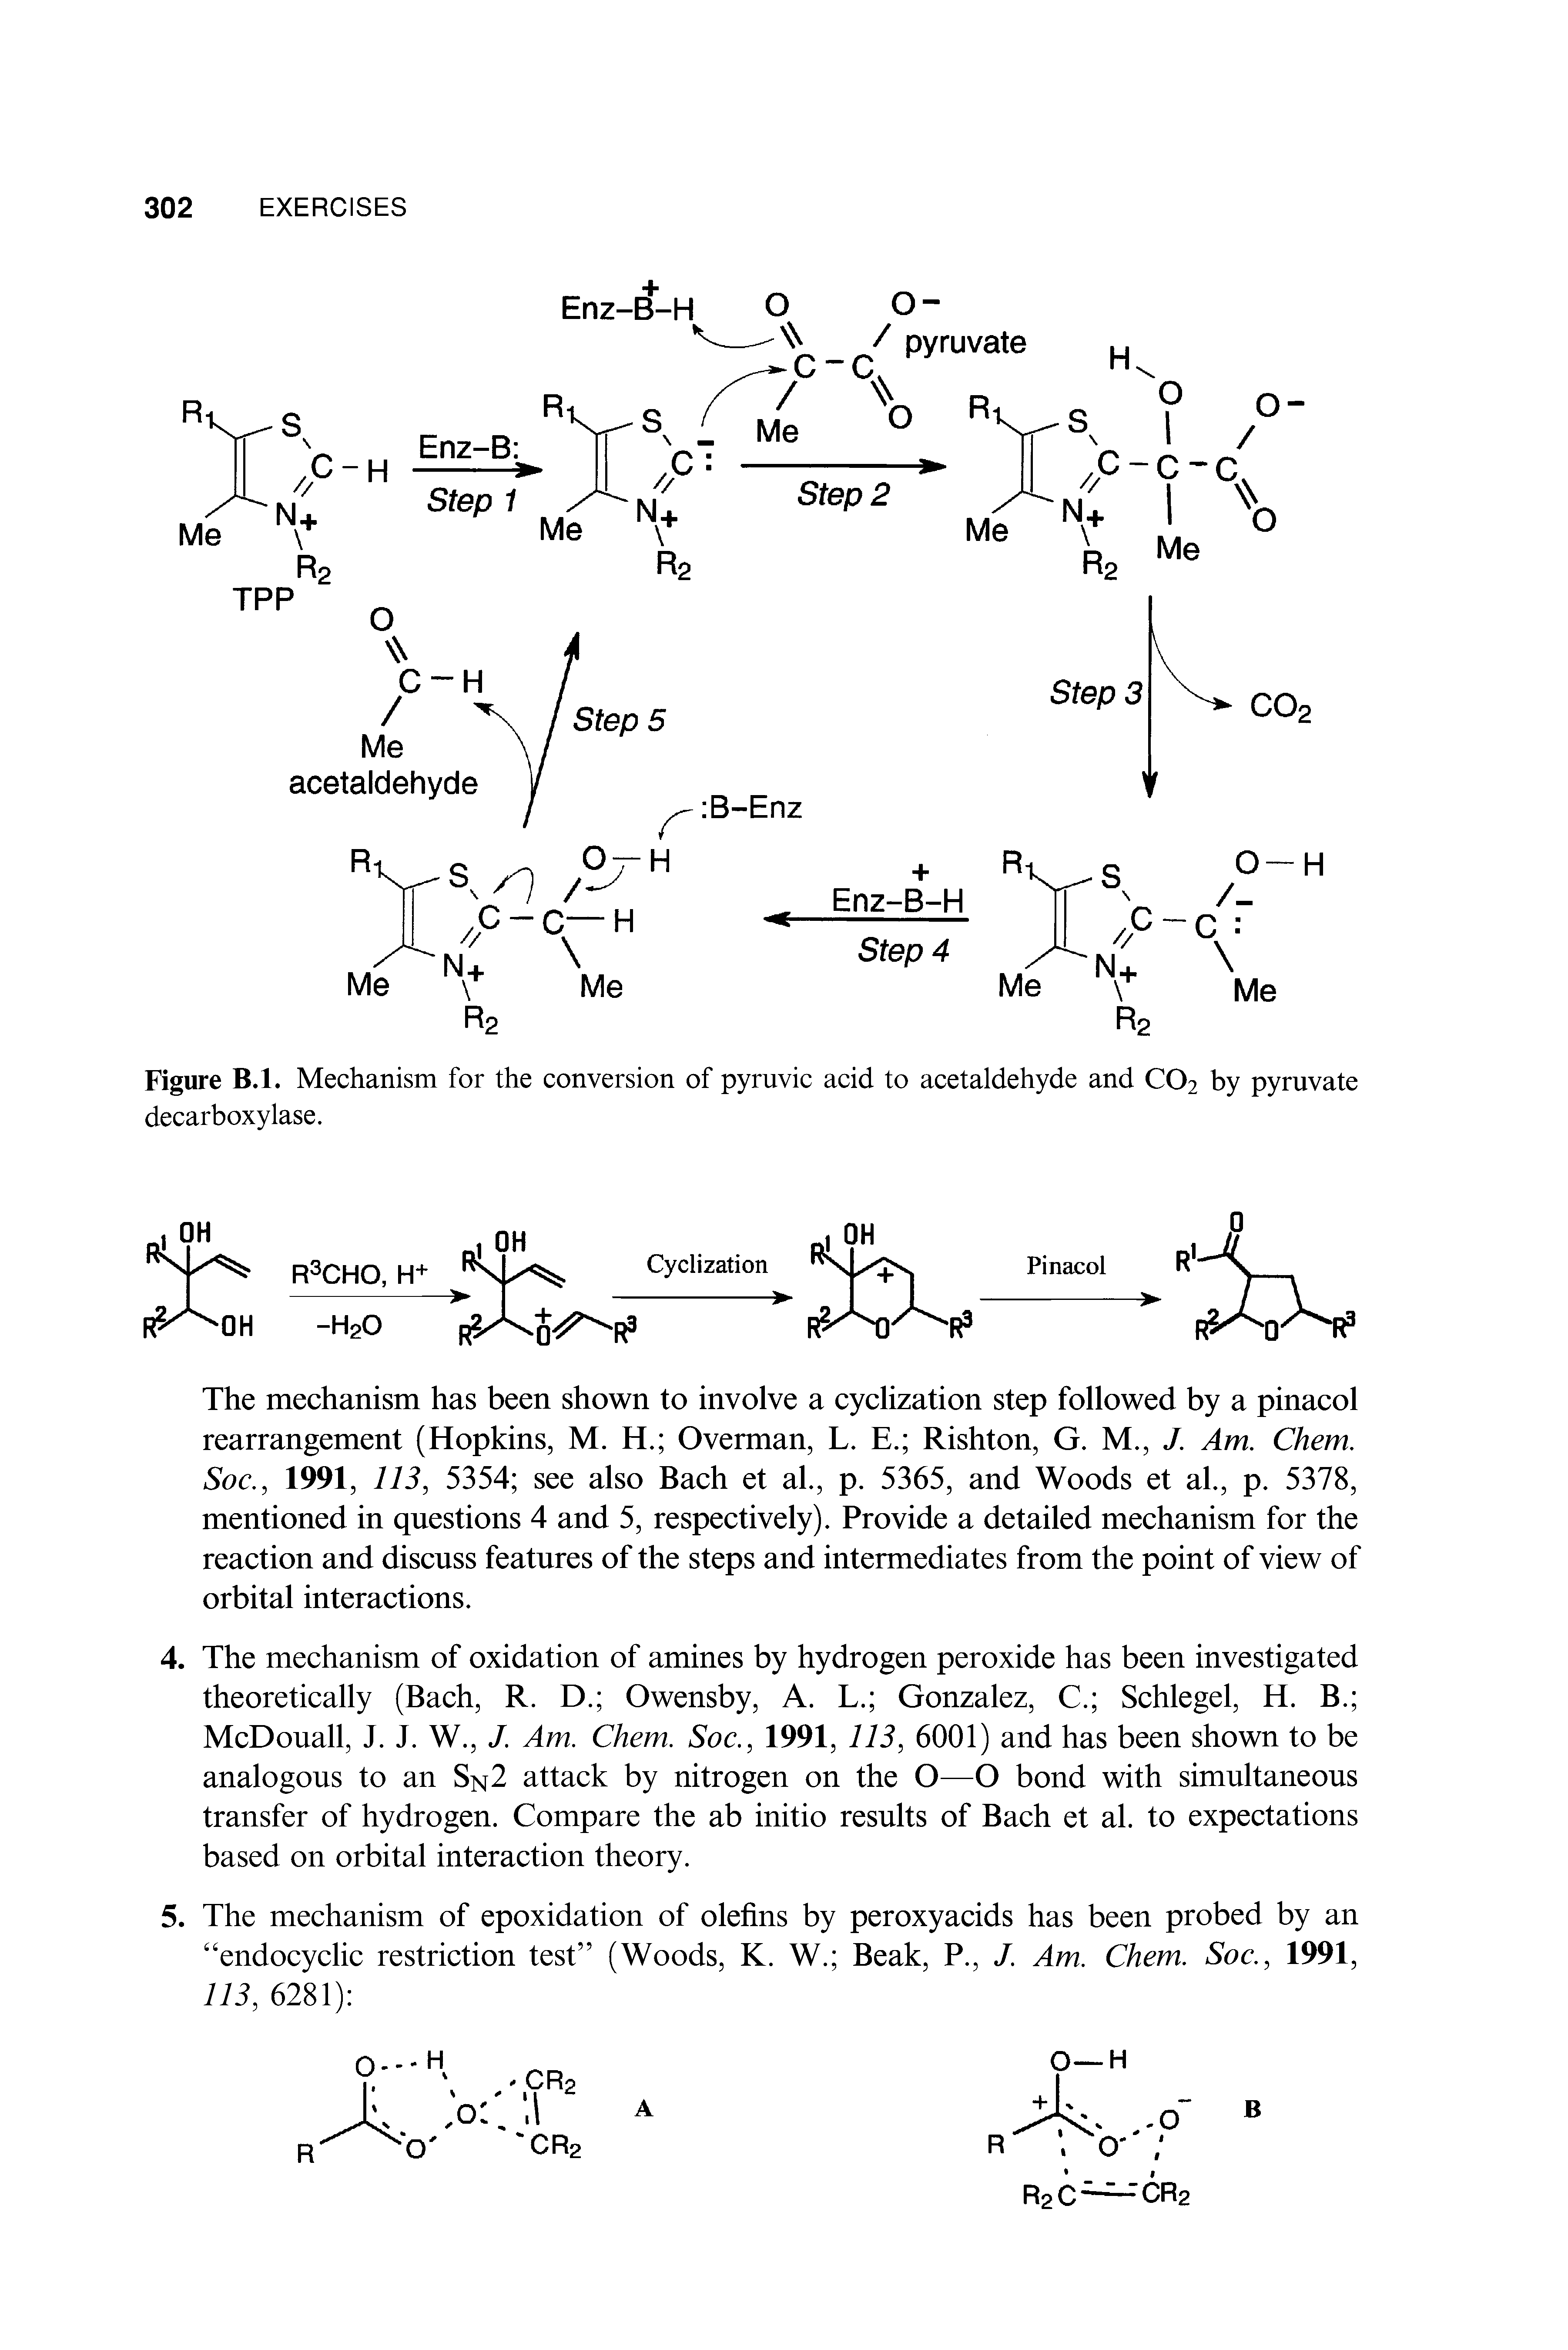 Figure B.l. Mechanism for the conversion of pyruvic acid to acetaldehyde and CO2 by pyruvate decarboxylase.